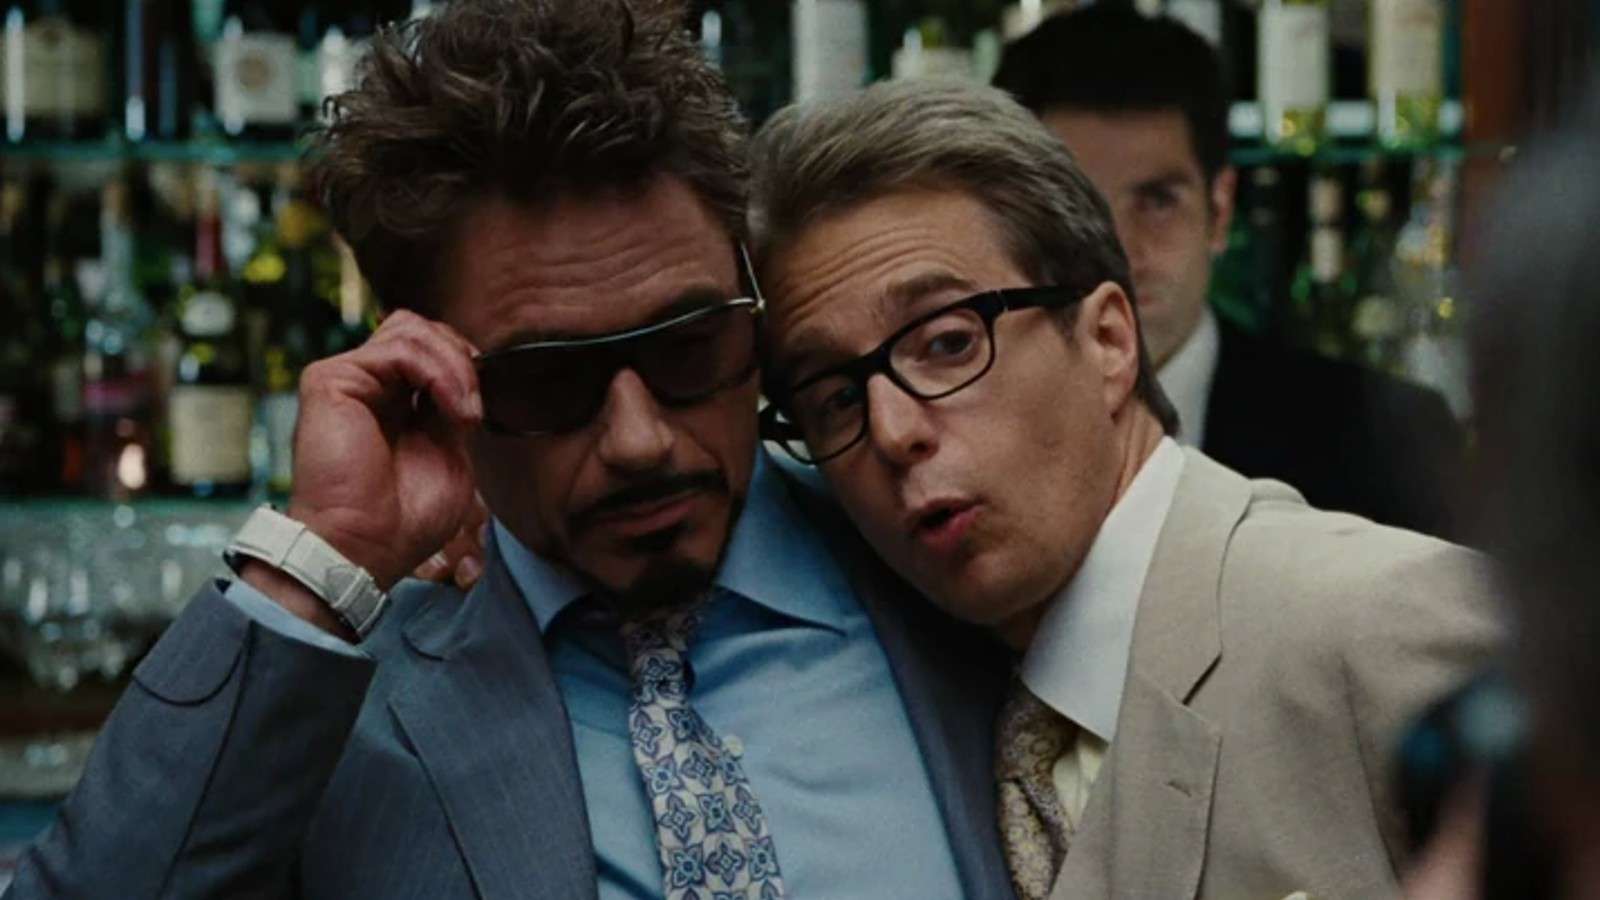 Robert Downey Jr. and Sam Rockwell in Iron Man 2